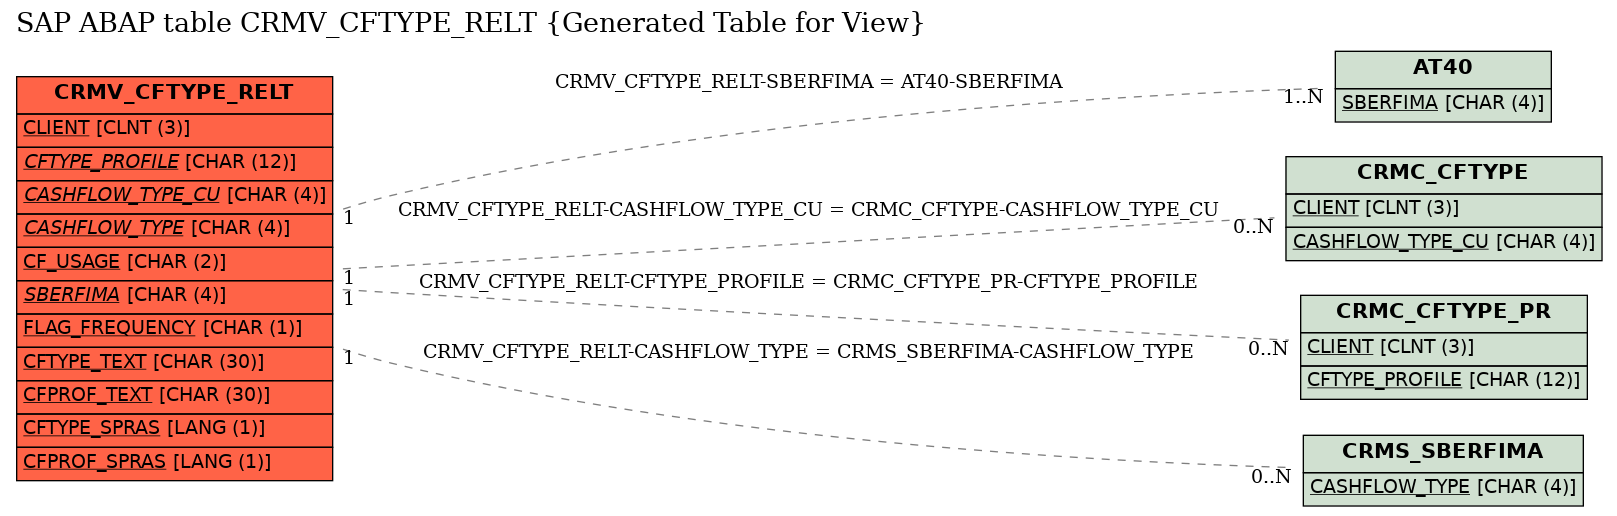 E-R Diagram for table CRMV_CFTYPE_RELT (Generated Table for View)